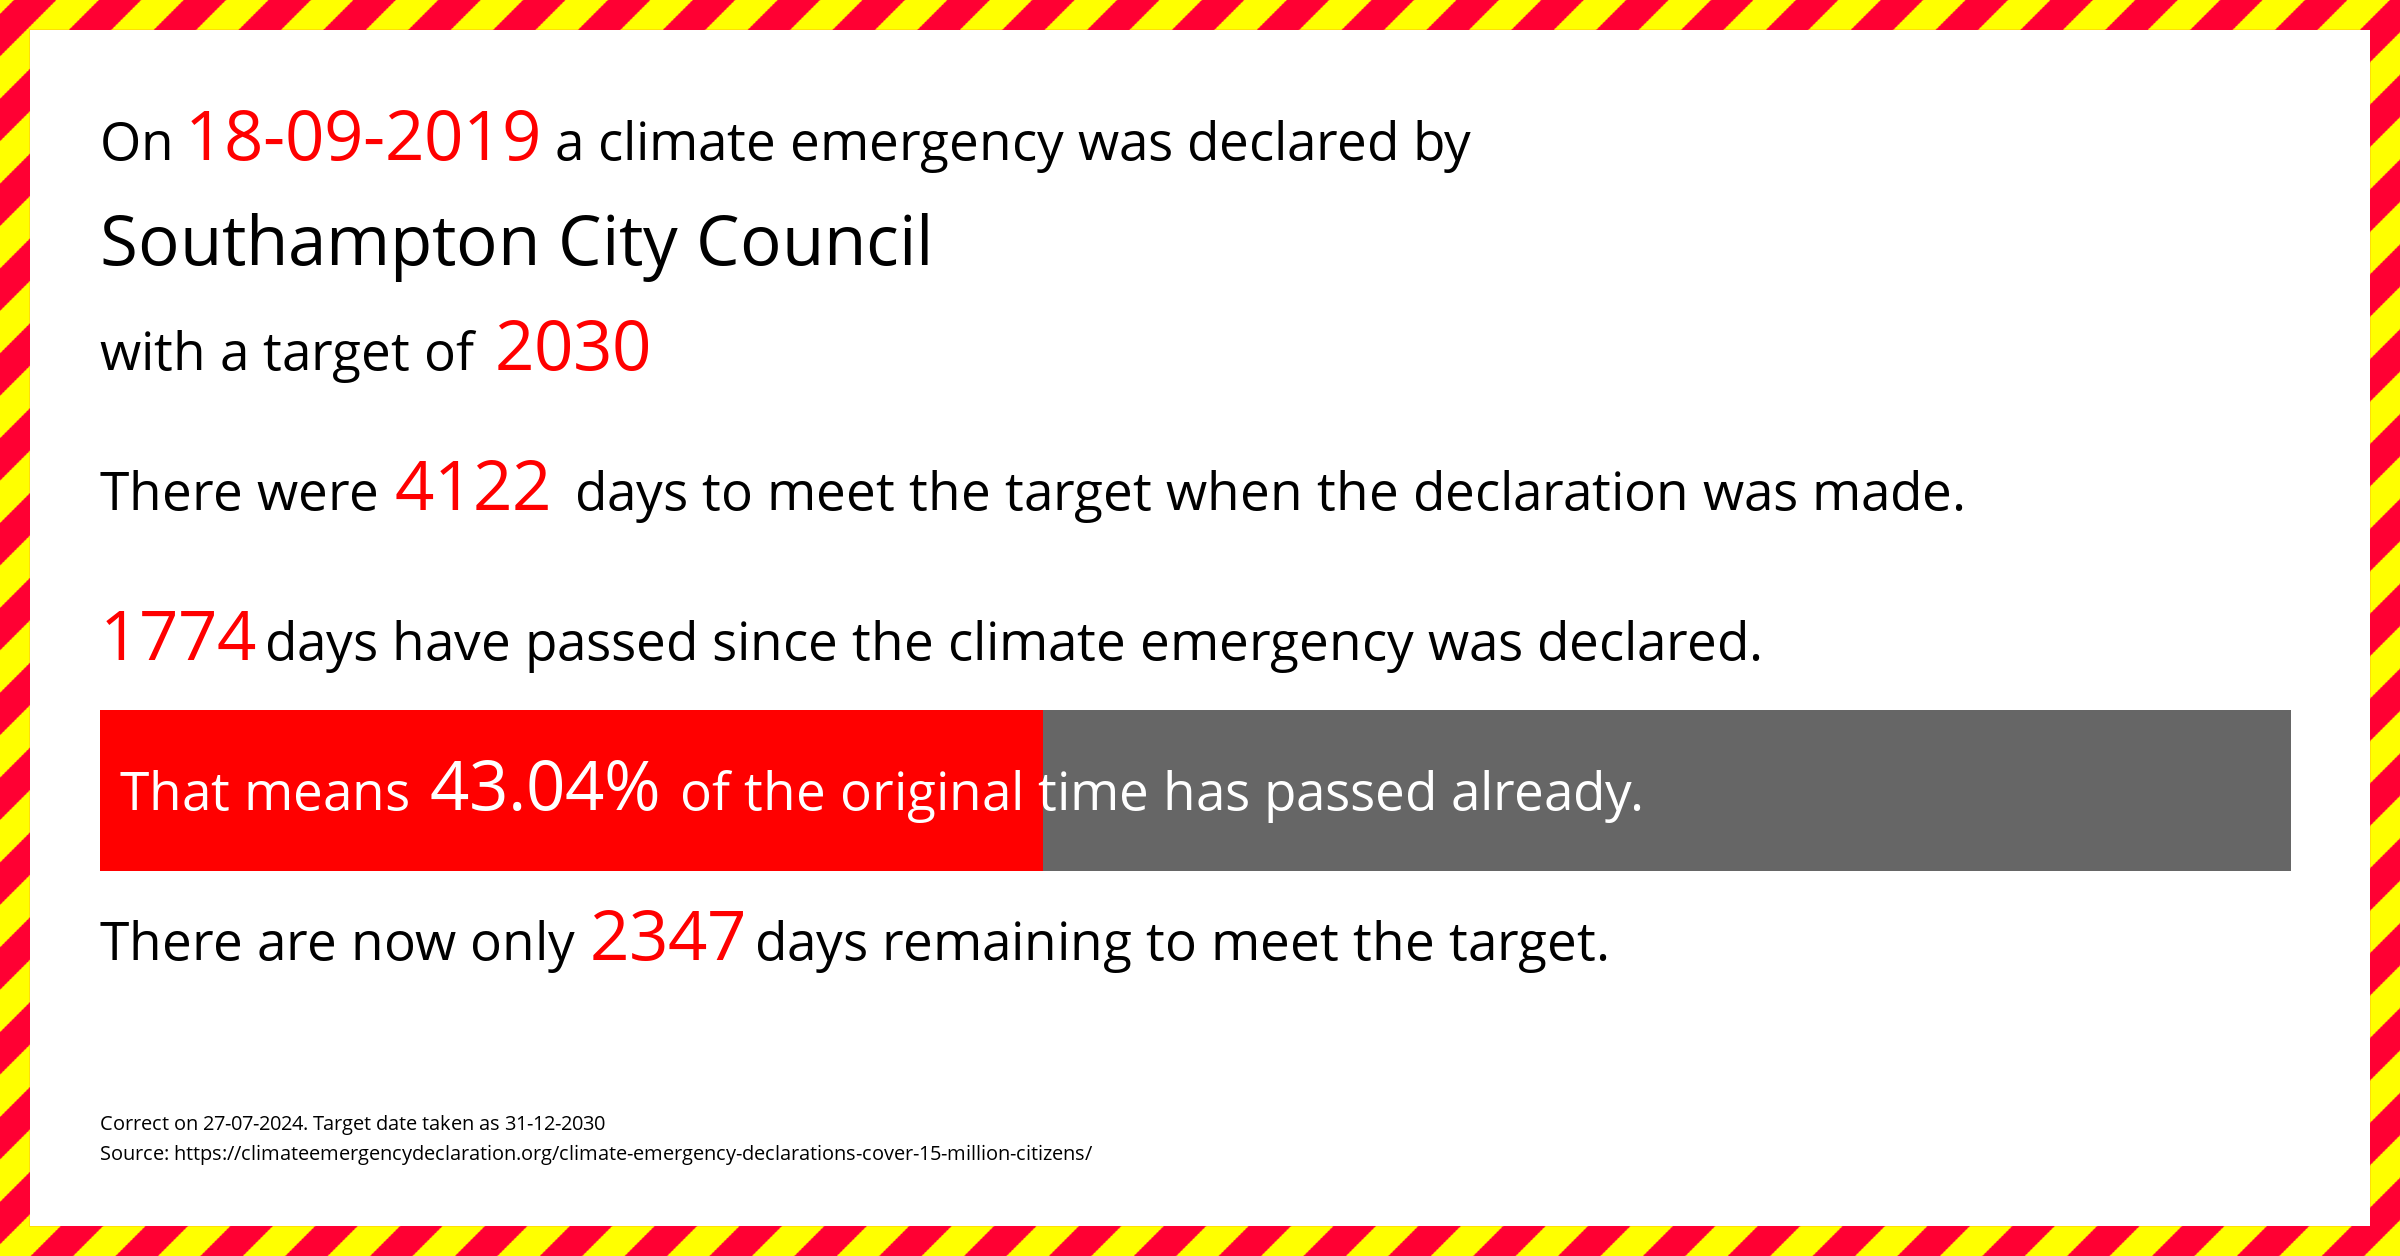 Southampton City Council  declared a Climate emergency on Wednesday 18th September 2019, with a target of 2030.